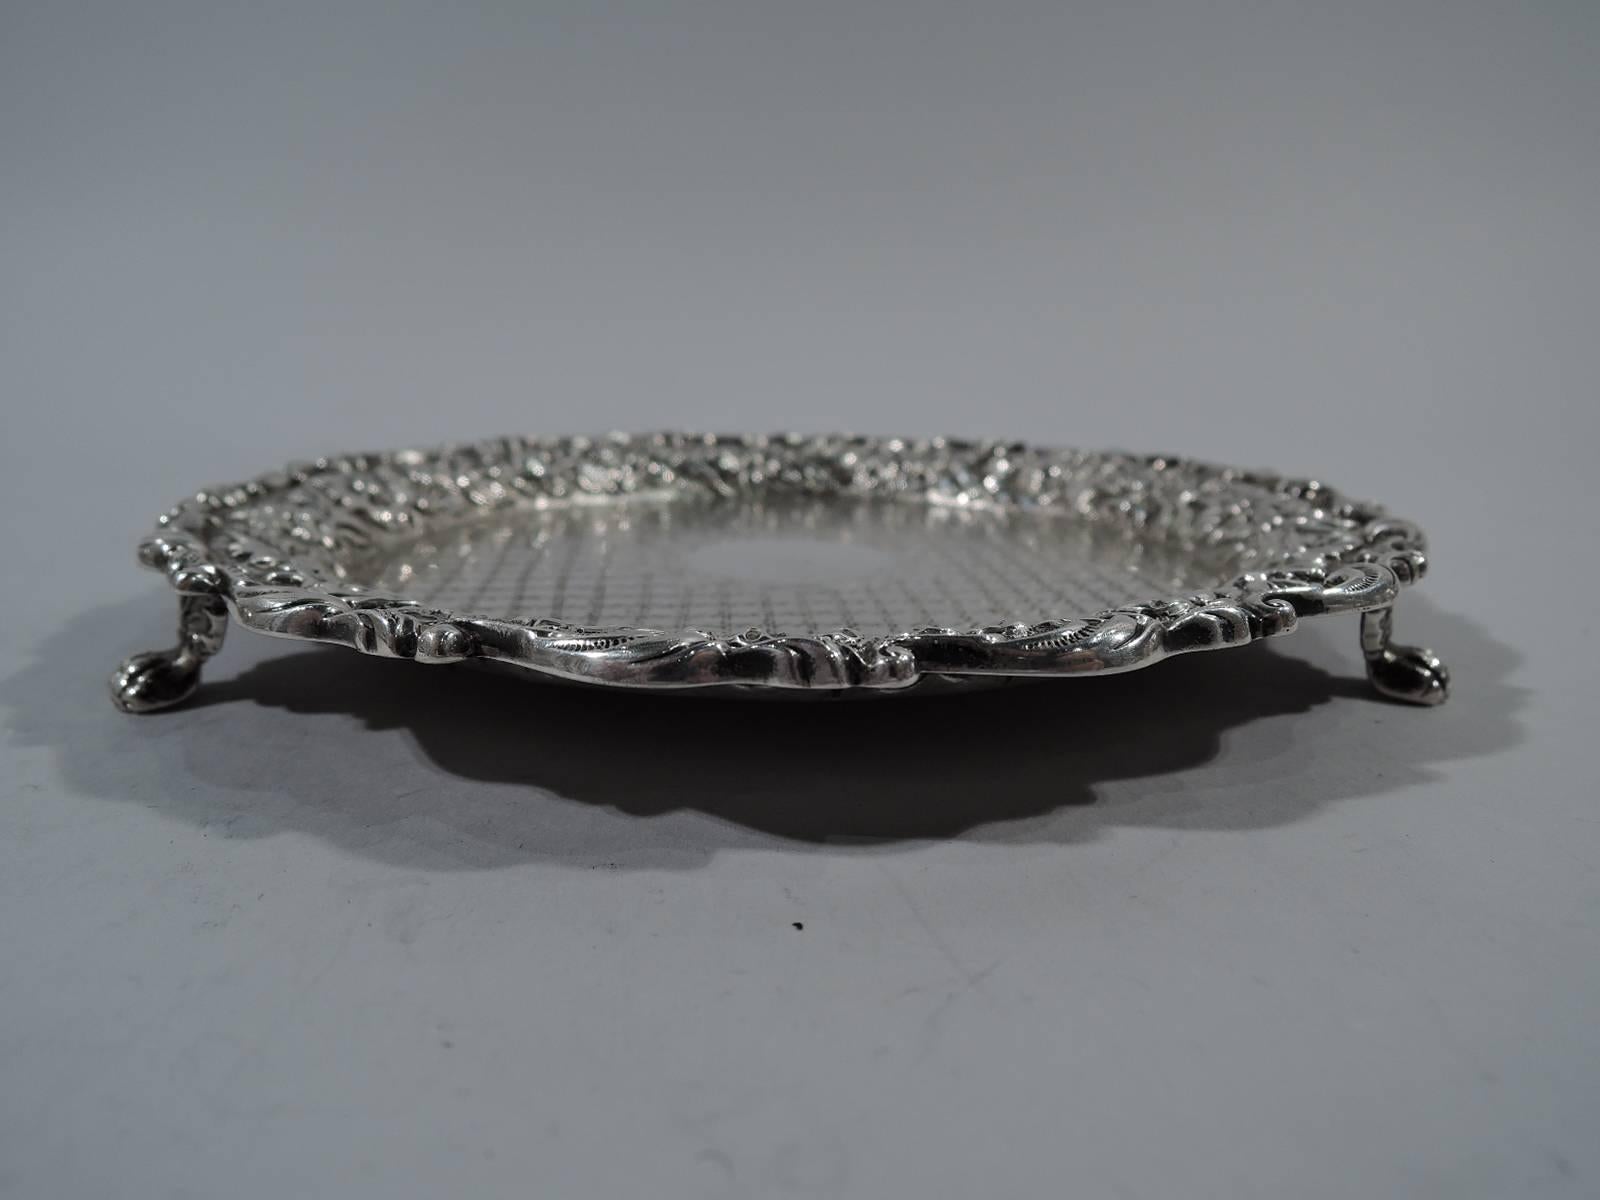 Sterling silver salver. Made by S. Kirk & Son Co. in Baltimore, circa 1910. Well has engraved diaper pattern with central wreath frame (vacant). Scrolled rim with repousse floral garland on stippled ground. Three paw supports. Measure: Weight 4.7